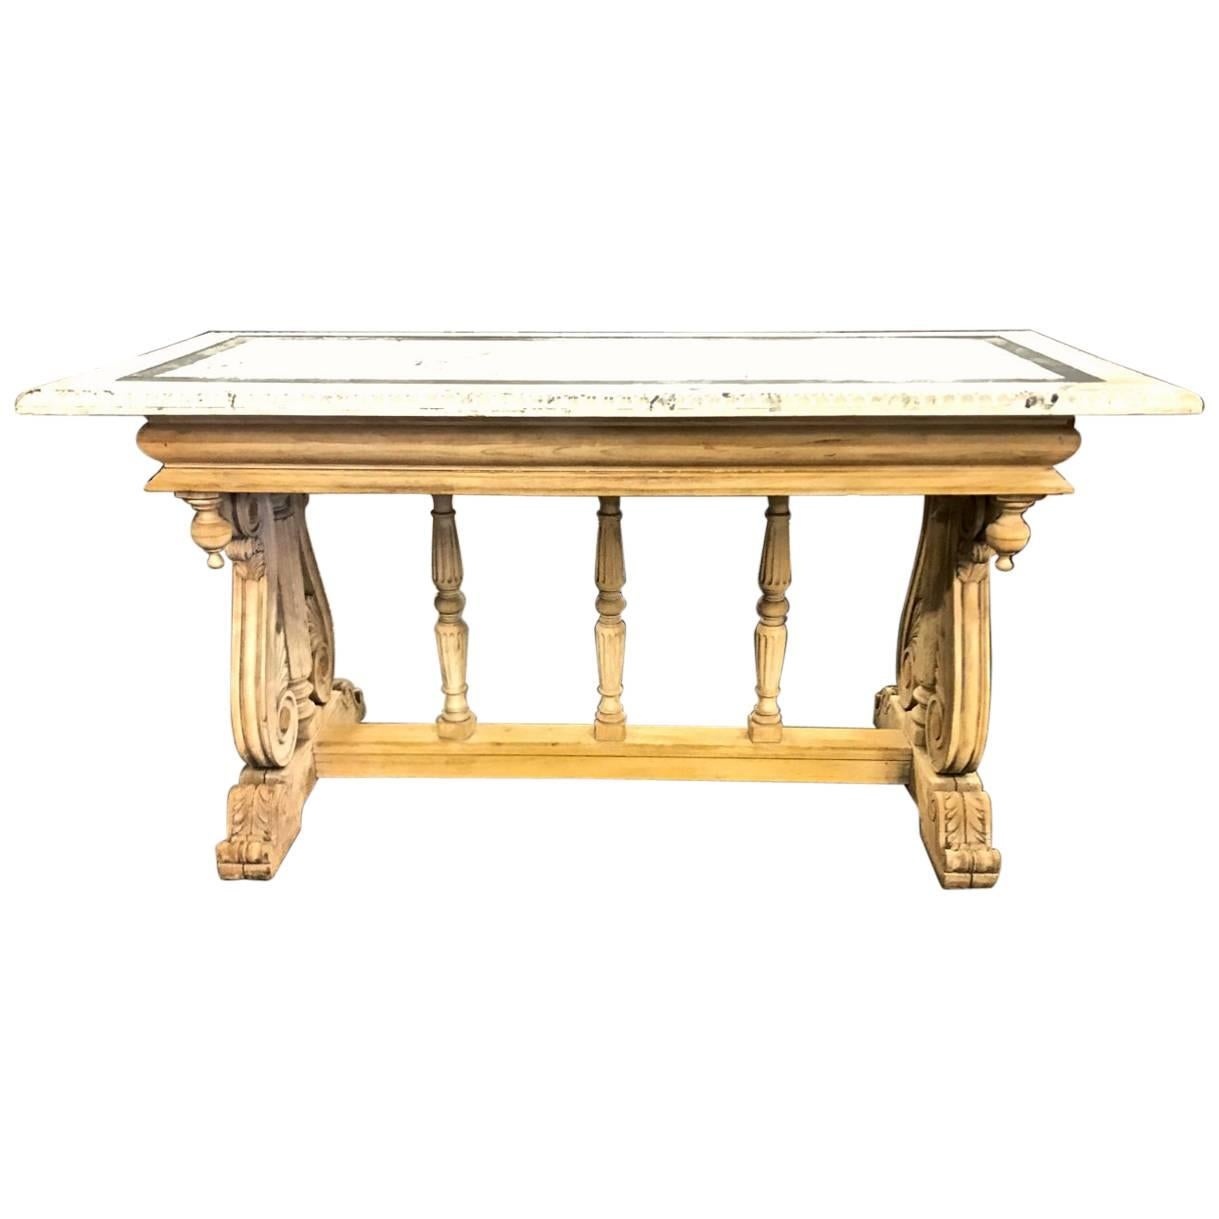 19th Century Stripped Renaissance Revival Library Table